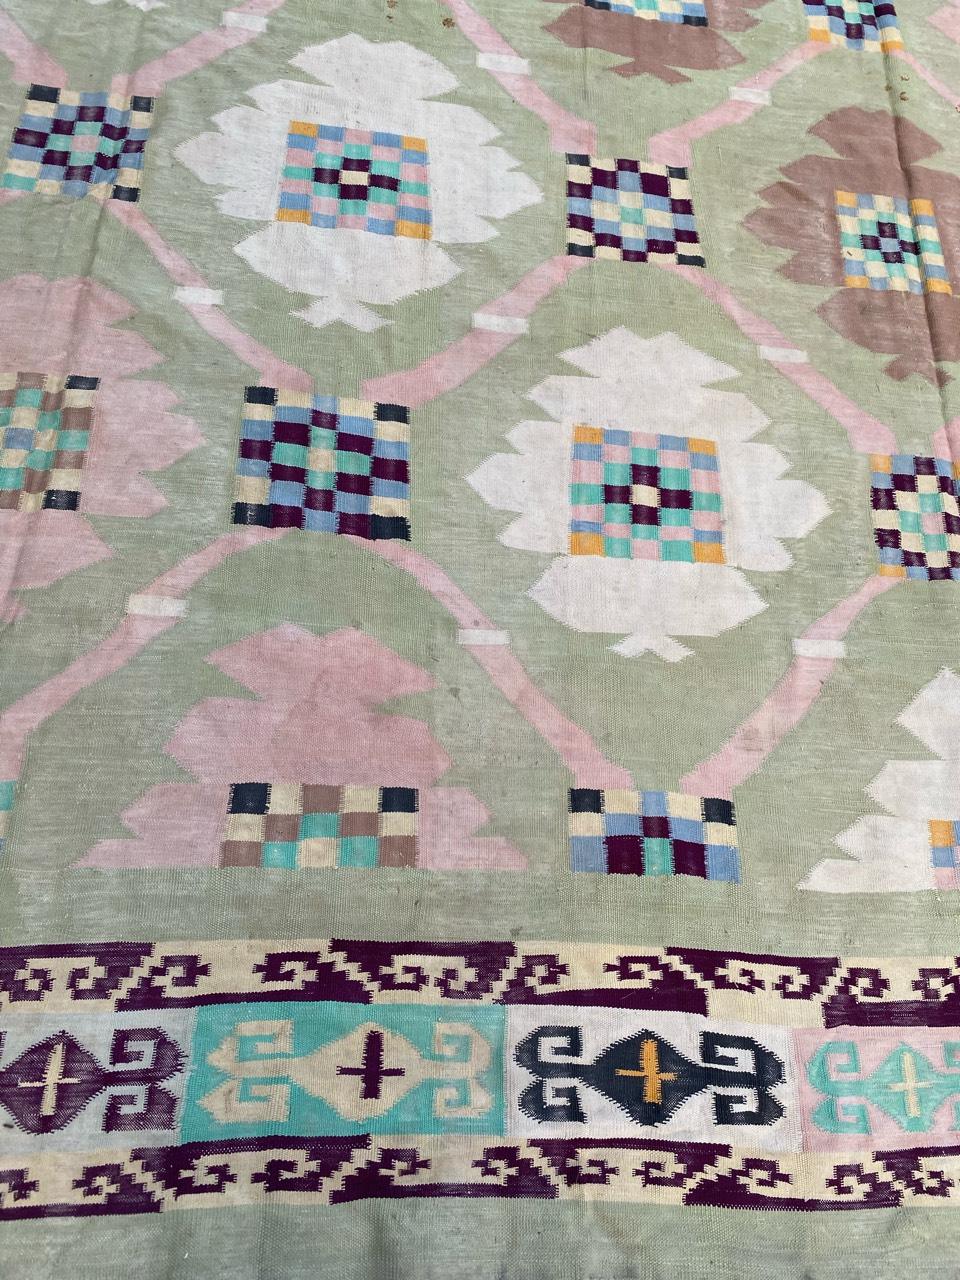 Beautiful large flat rug from India, with a nice geometrical design and beautiful colors with green, pink, brown, yellow, blue and purple, entirely handwoven with cotton on cotton.